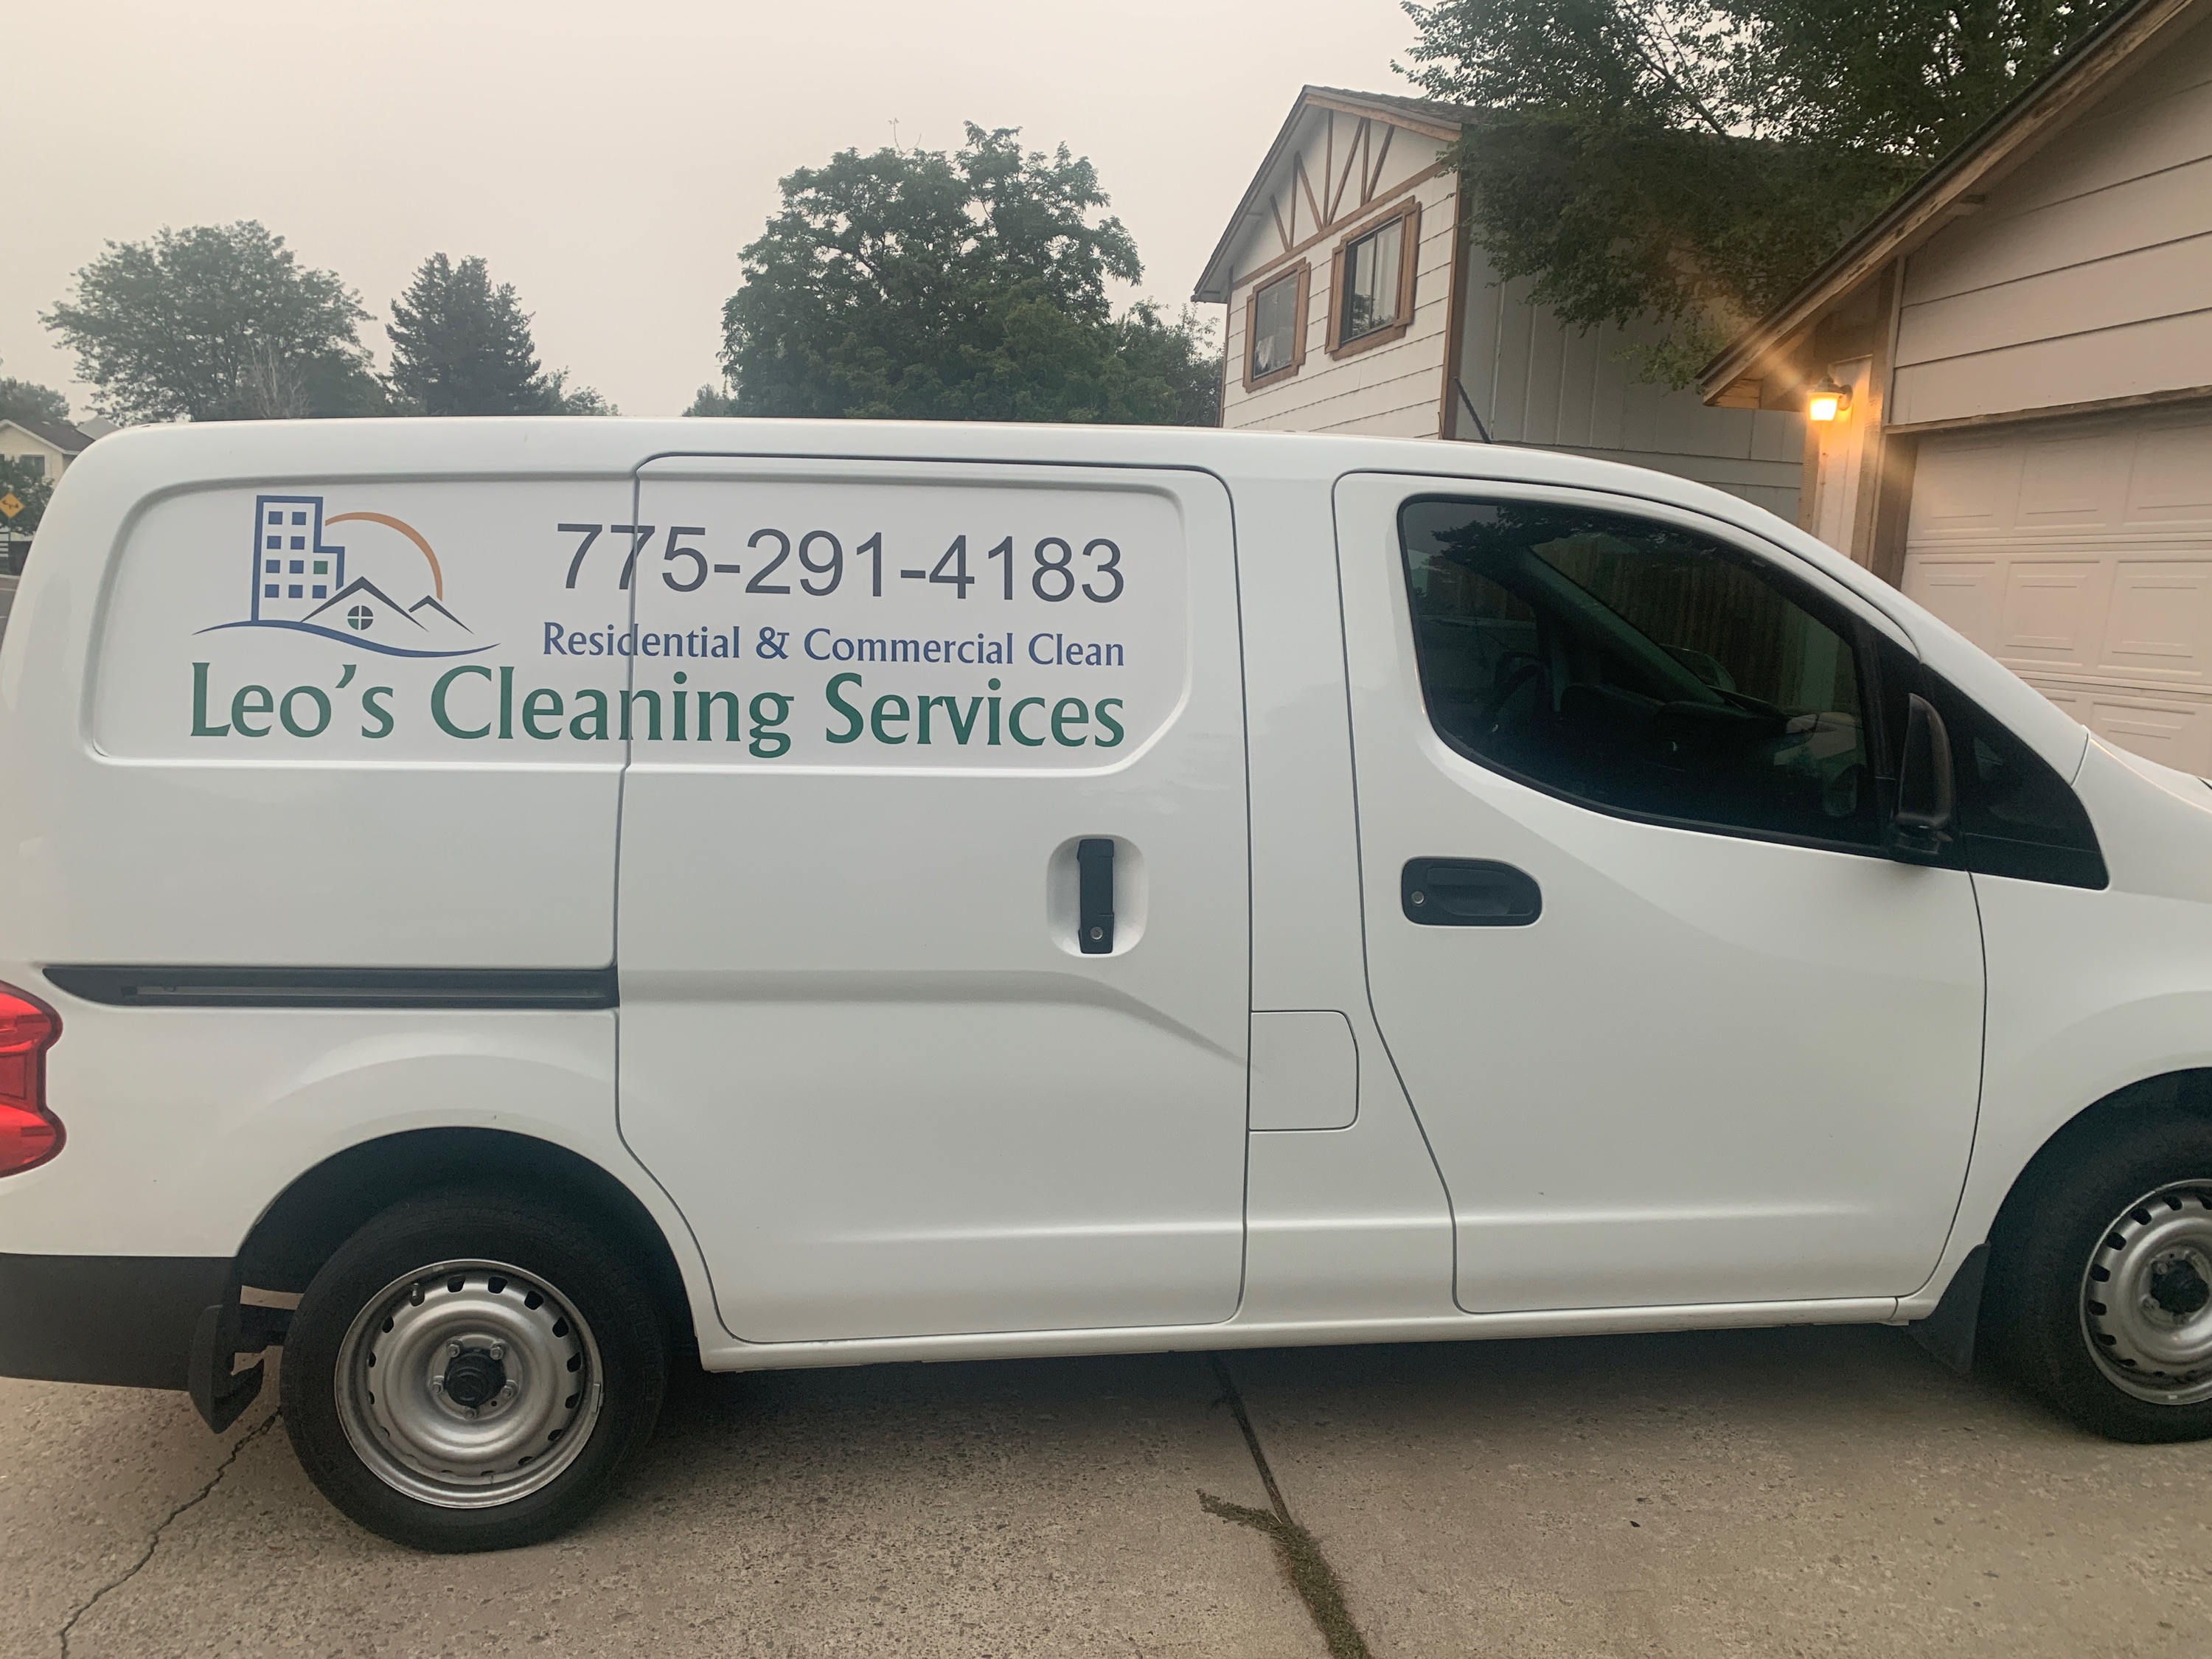 LEO'S CLEANING SERVICES Logo